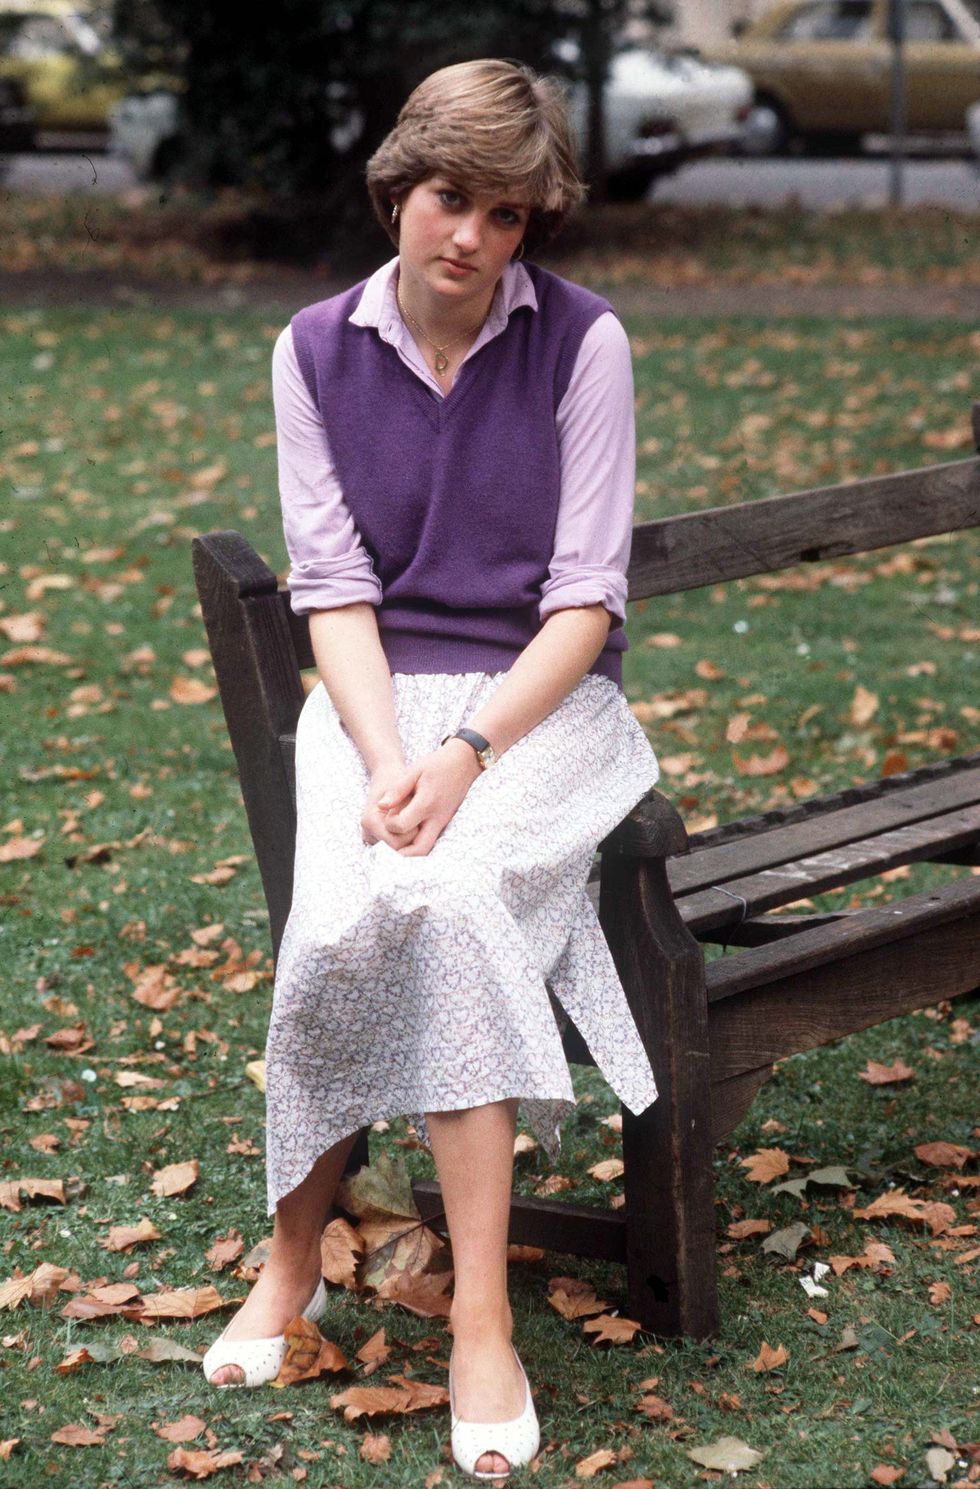 london, united kingdom   september 17  lady diana spencer age 19 at the young england kindergarden school at stsaviours church hall st georges sq in londons pimlico she is working there as a nursery assistant  photo by tim graham photo library via getty images